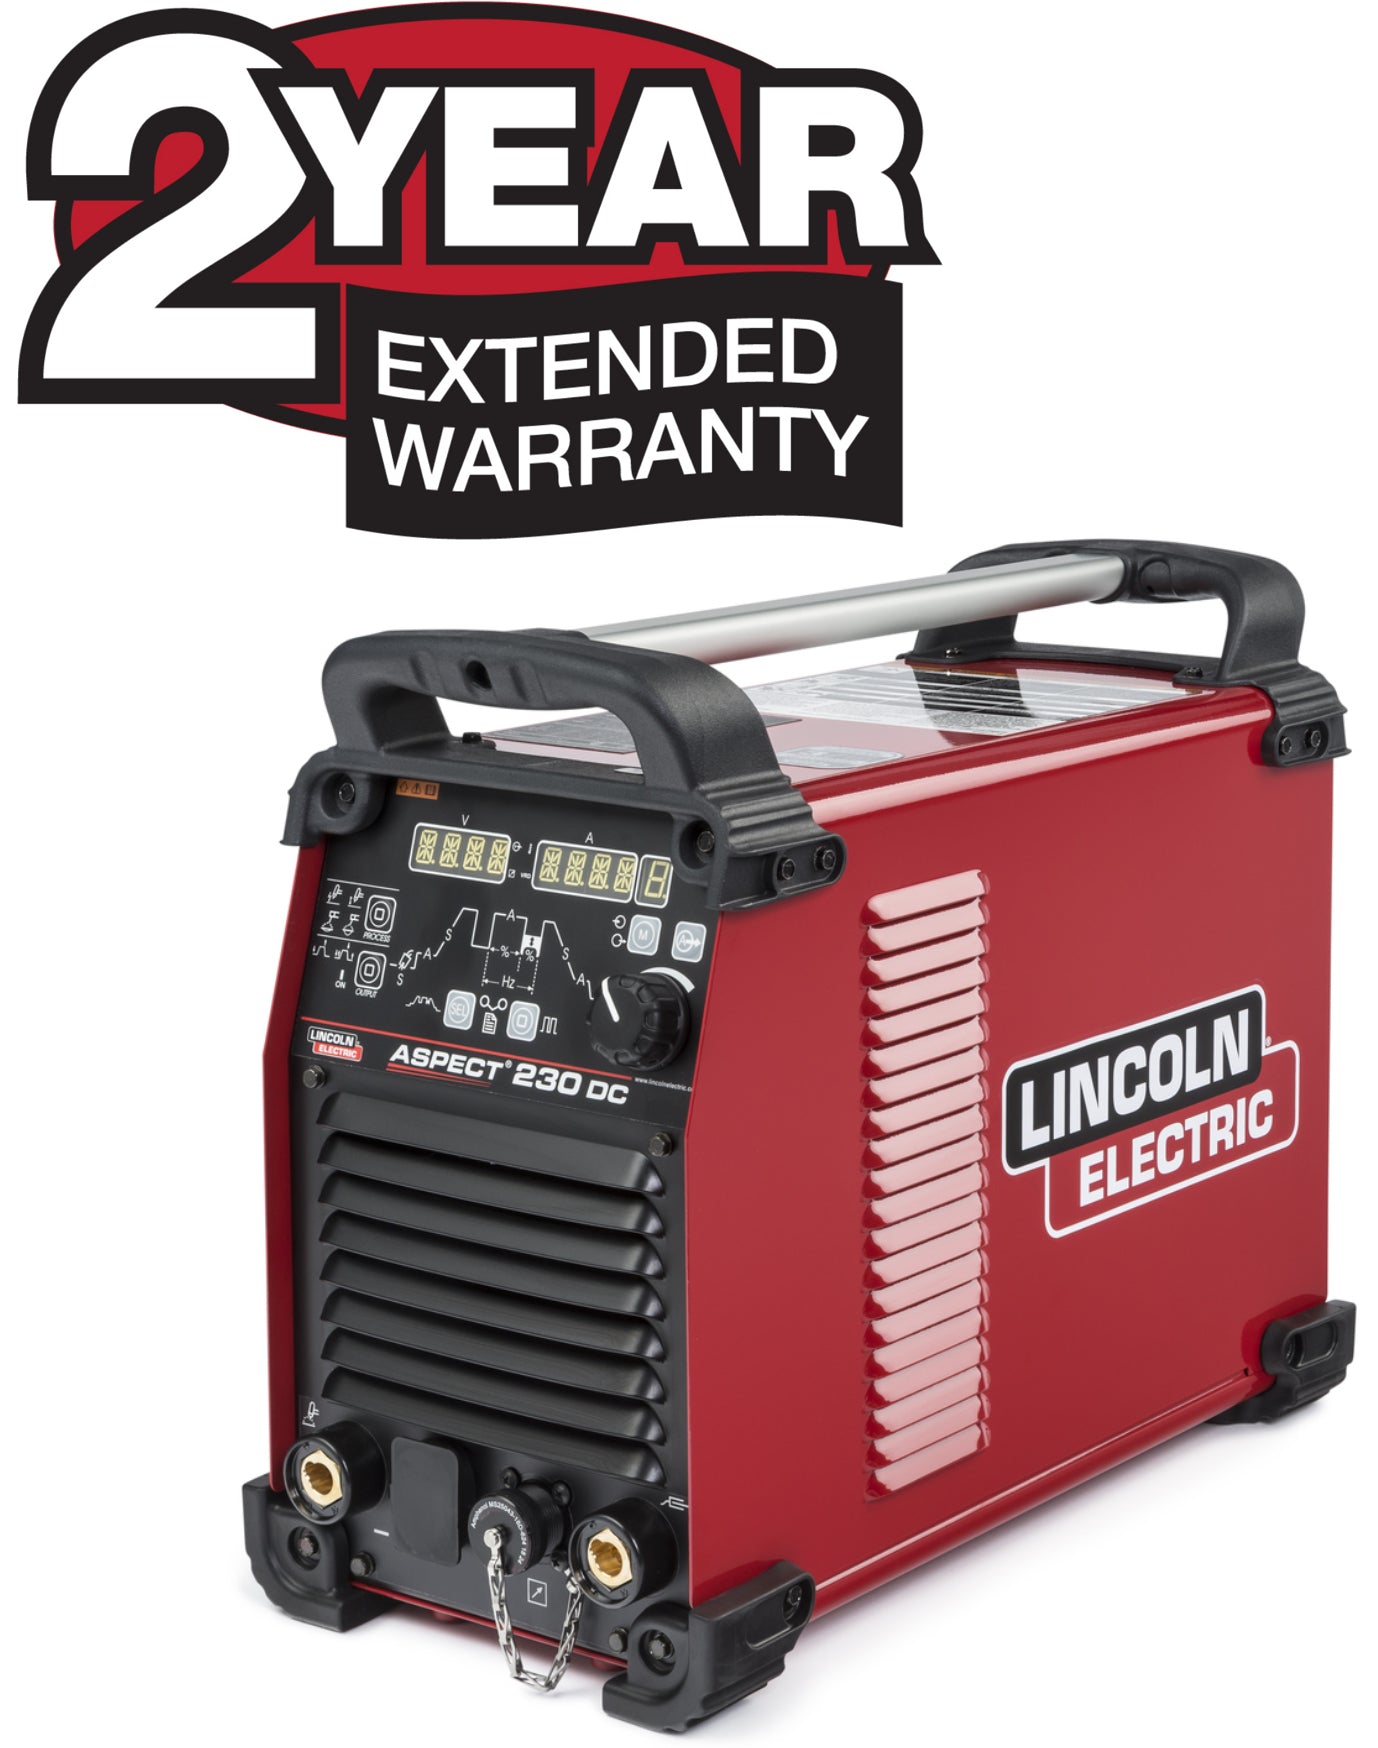 Lincoln 2-Year Extended Warranty - Aspect 230 DC X4346